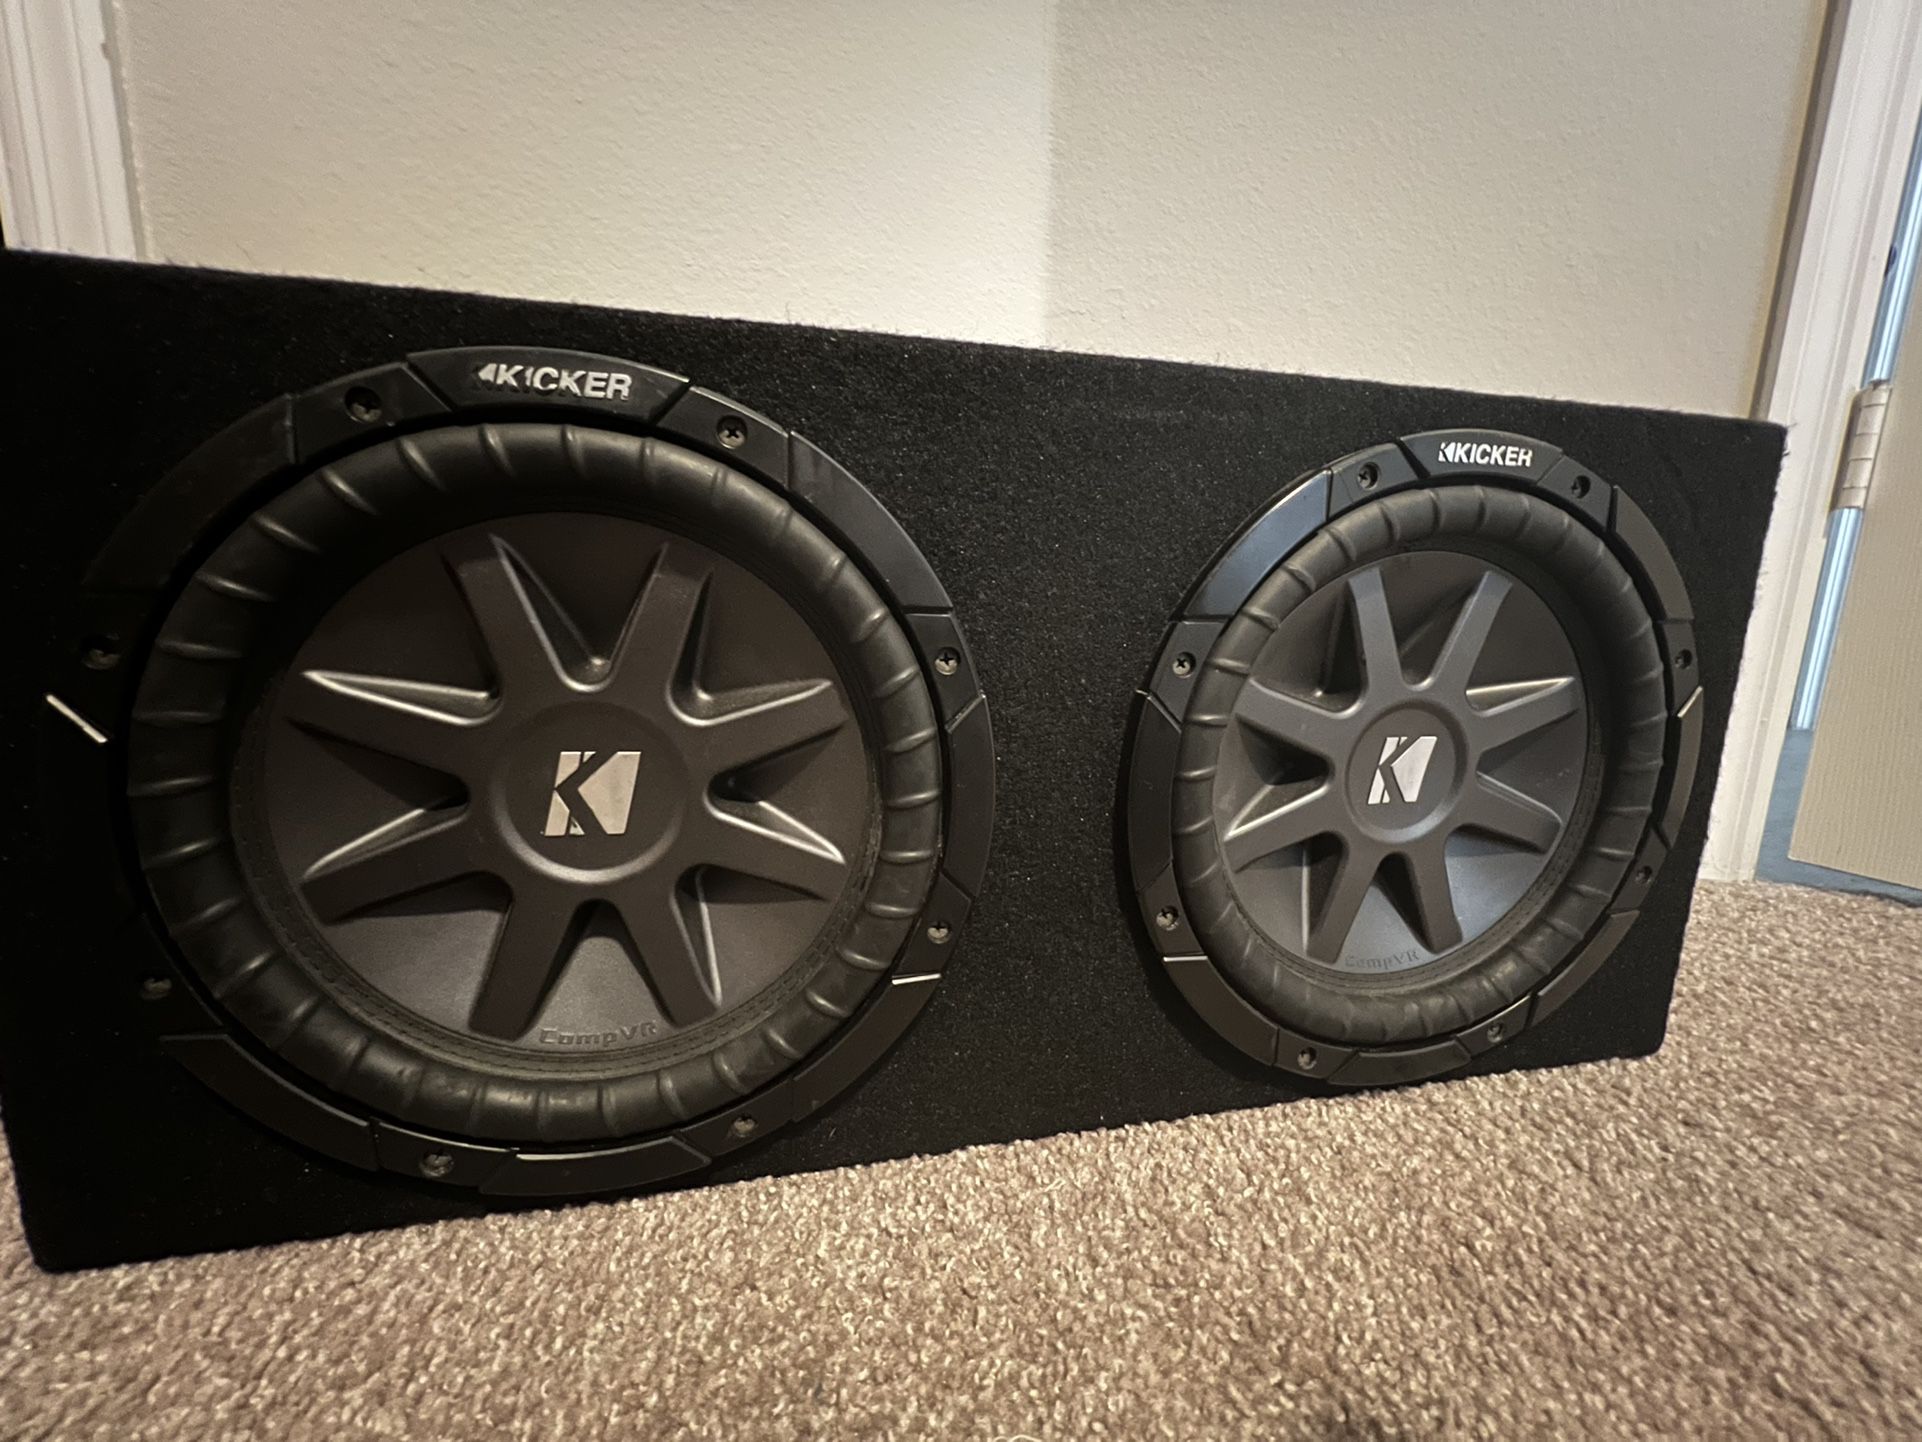 Kicker Subwoofers With Kicker Amp